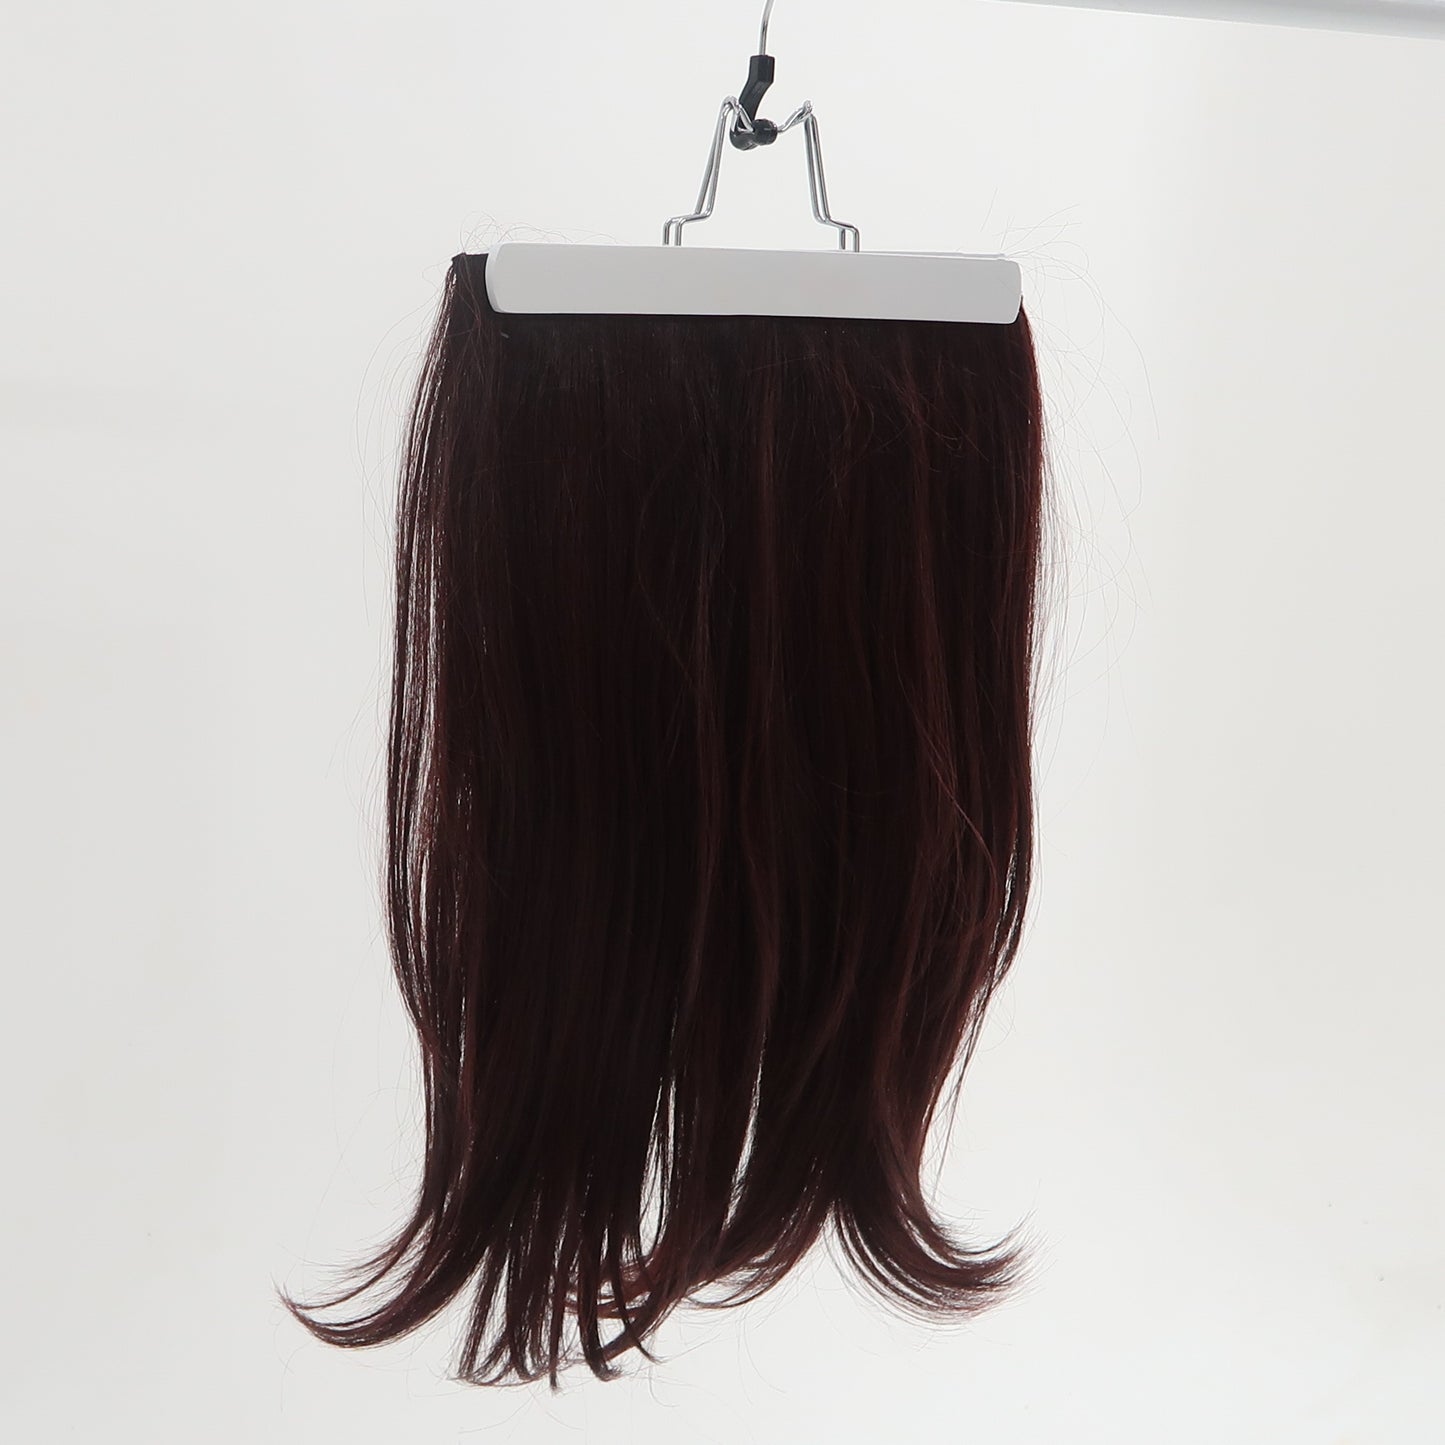 Straight Clip-in Weave 18”